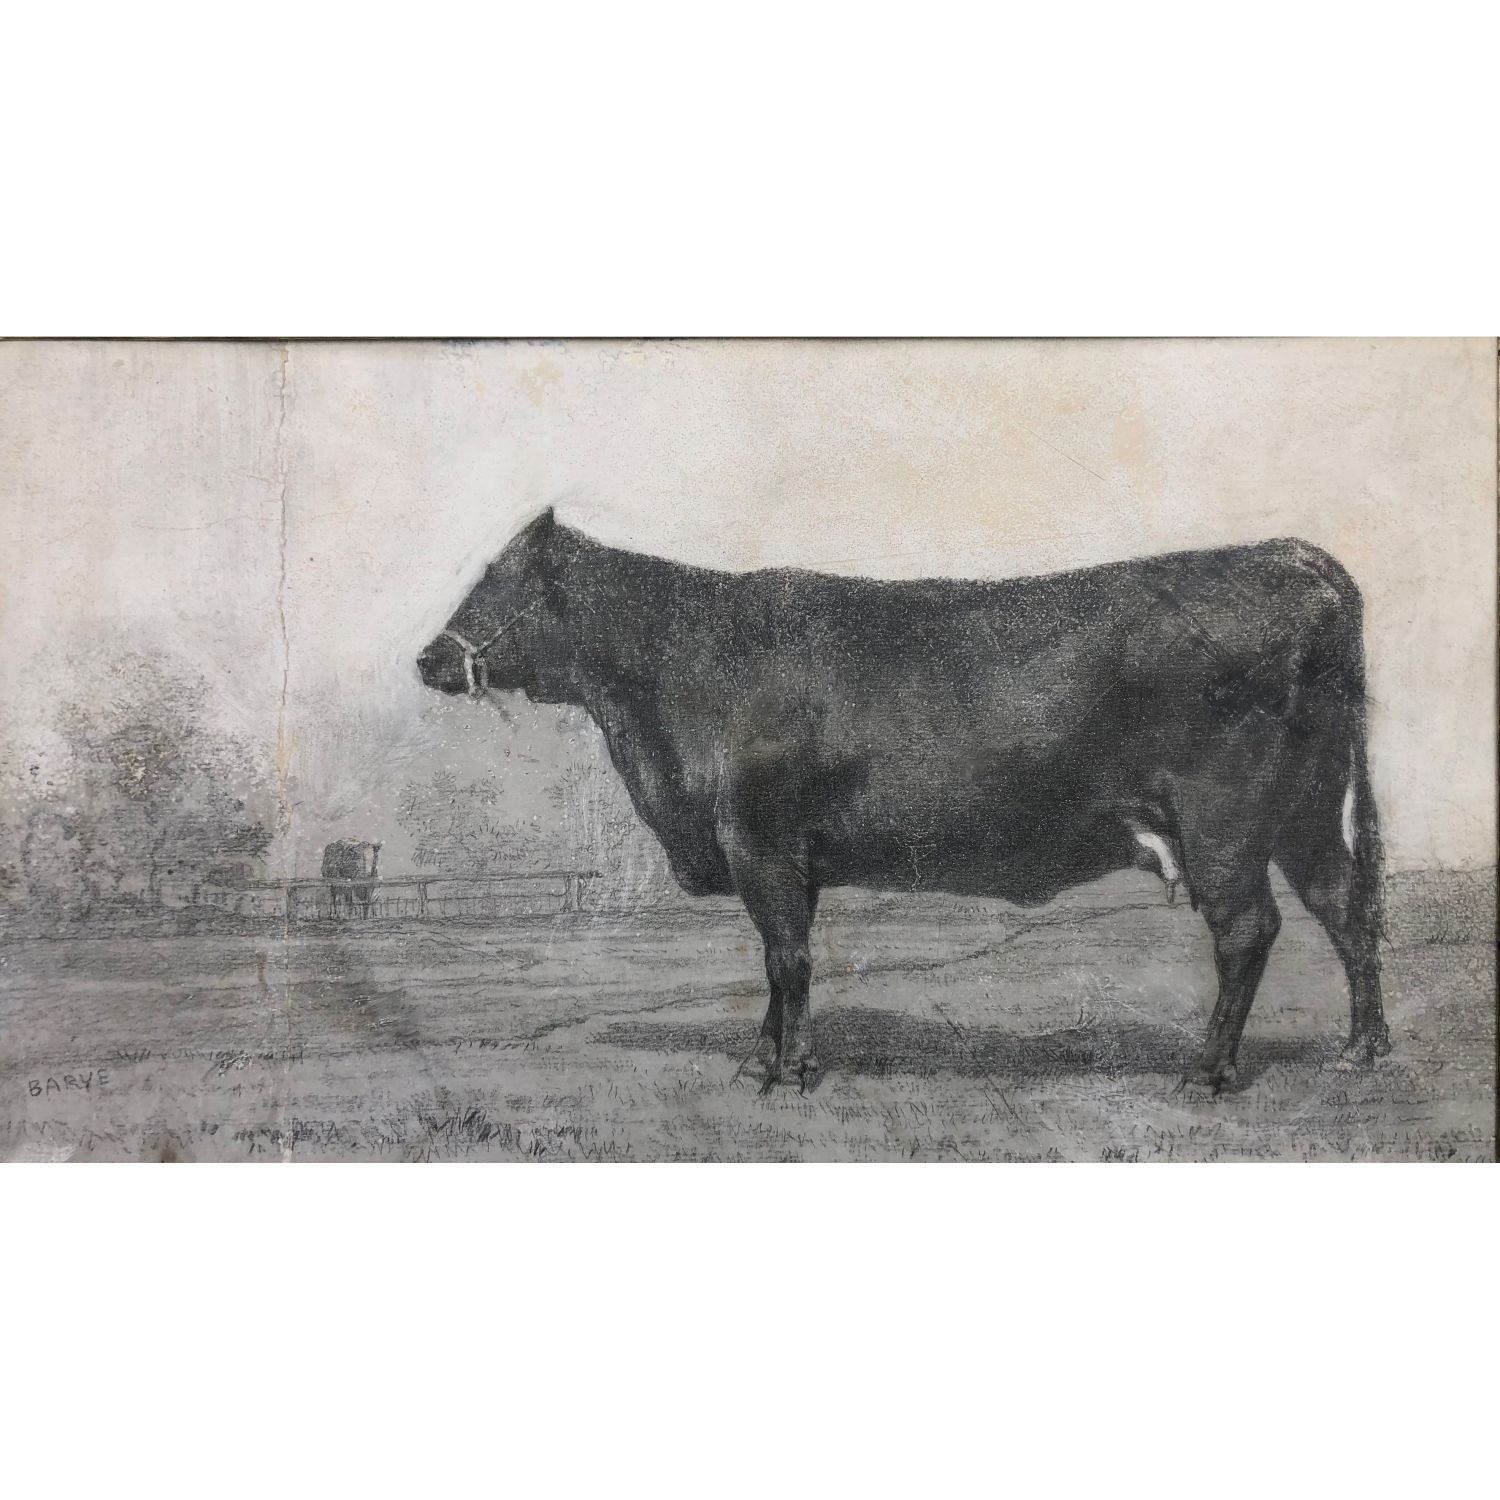 Null ANTOINE LOUIS BARYE (1795-1875)

STUDY FOR A COW 

Charcoal and white chalk&hellip;